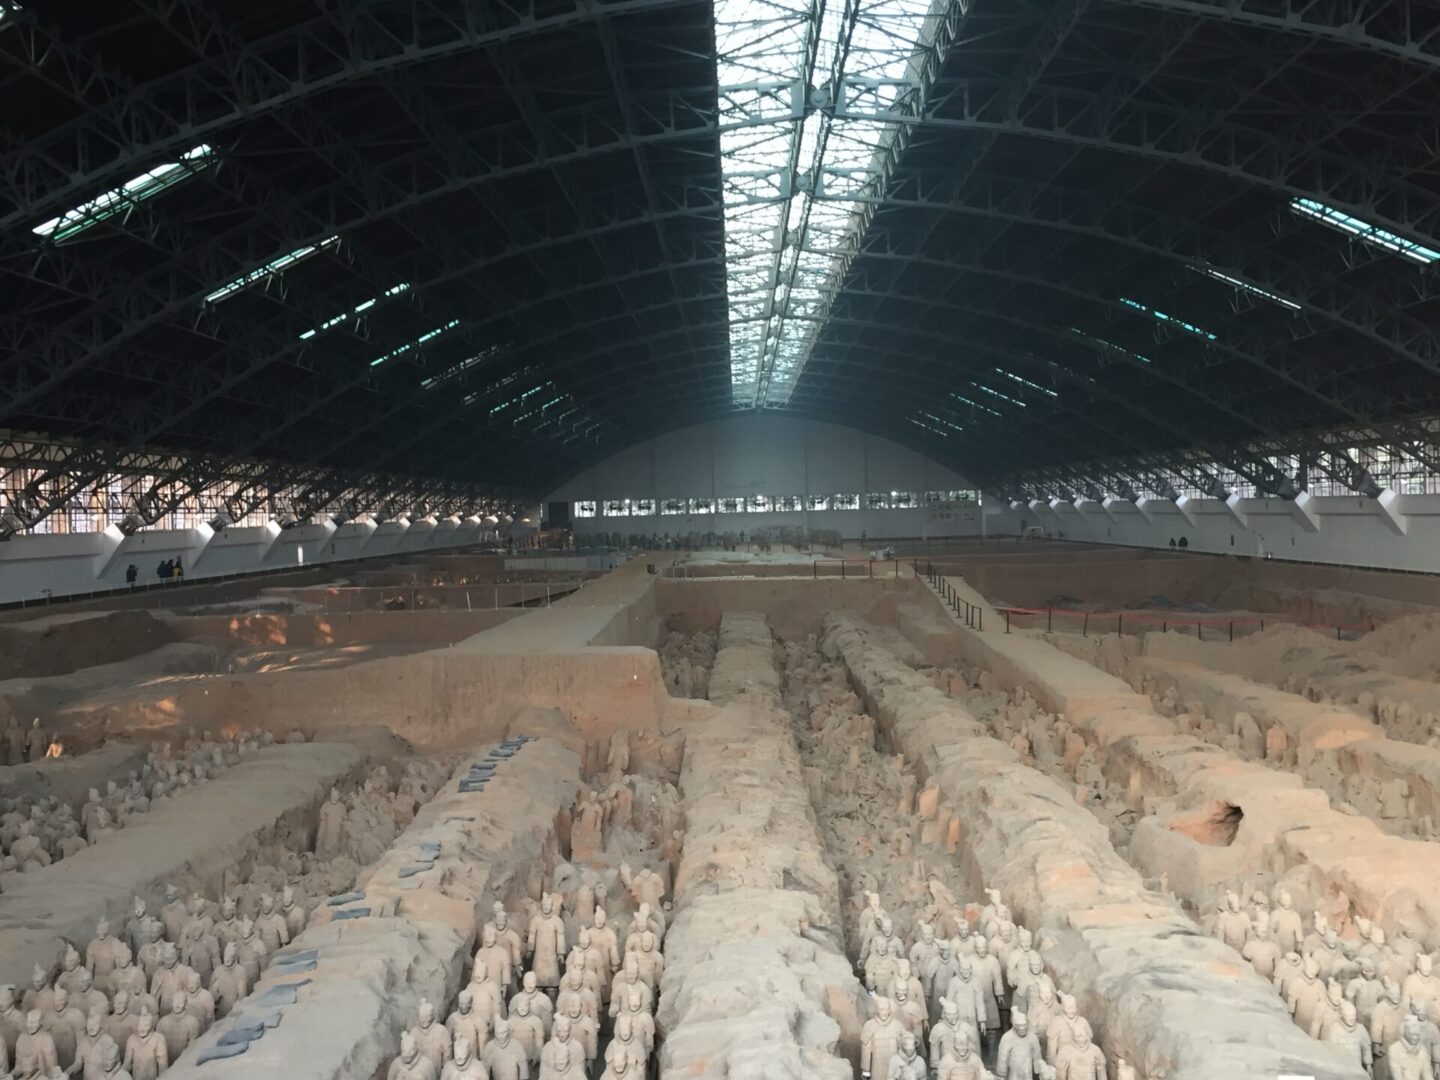 A large room with many statues of men in the middle.